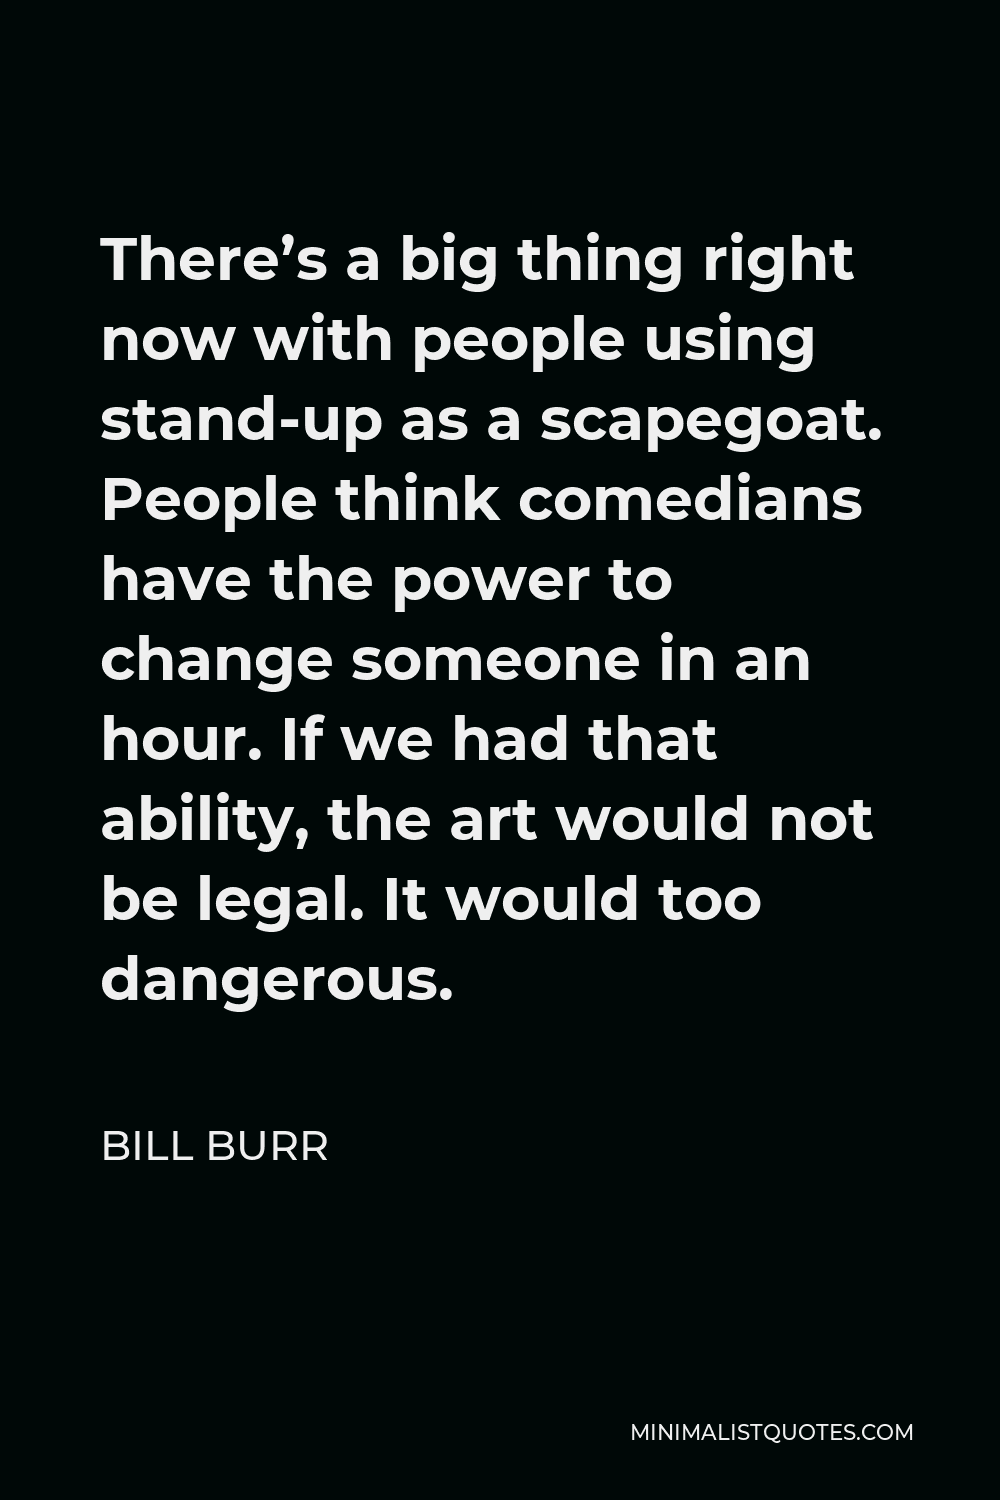 Bill Burr Quote - There’s a big thing right now with people using stand-up as a scapegoat. People think comedians have the power to change someone in an hour. If we had that ability, the art would not be legal. It would too dangerous.